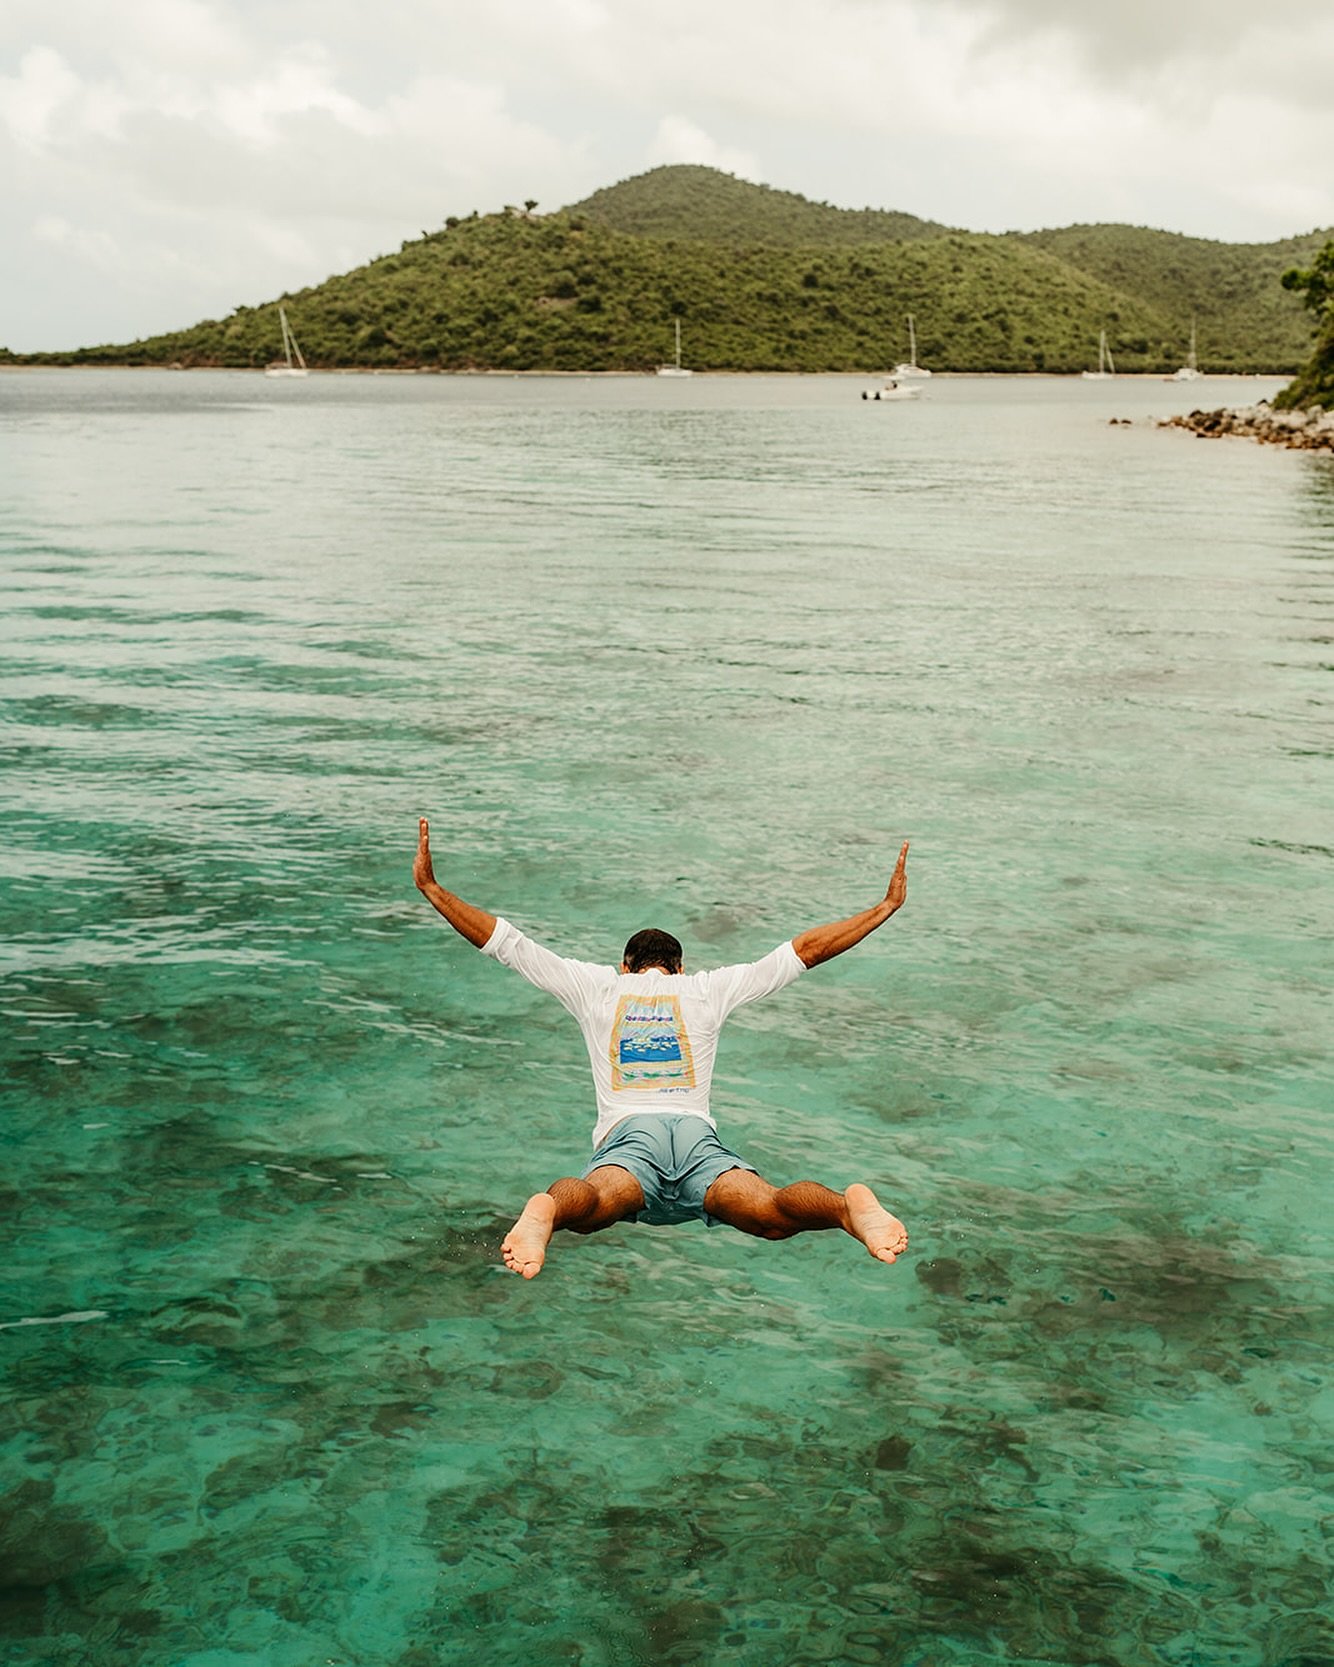 Jumping into the weekend with @islandrootscharters! Stop by tomorrow for your taco fix! ∕∕∕ OPEN Sunday - Friday &bull; 11:00am - 5:00pm [closed Saturday] 📸: @sarahbswan 
.
. 
. 
#LimeOut #LimeOutVi #CocktailsAndTacos #CoralBay #StJohn #USVirginIsla